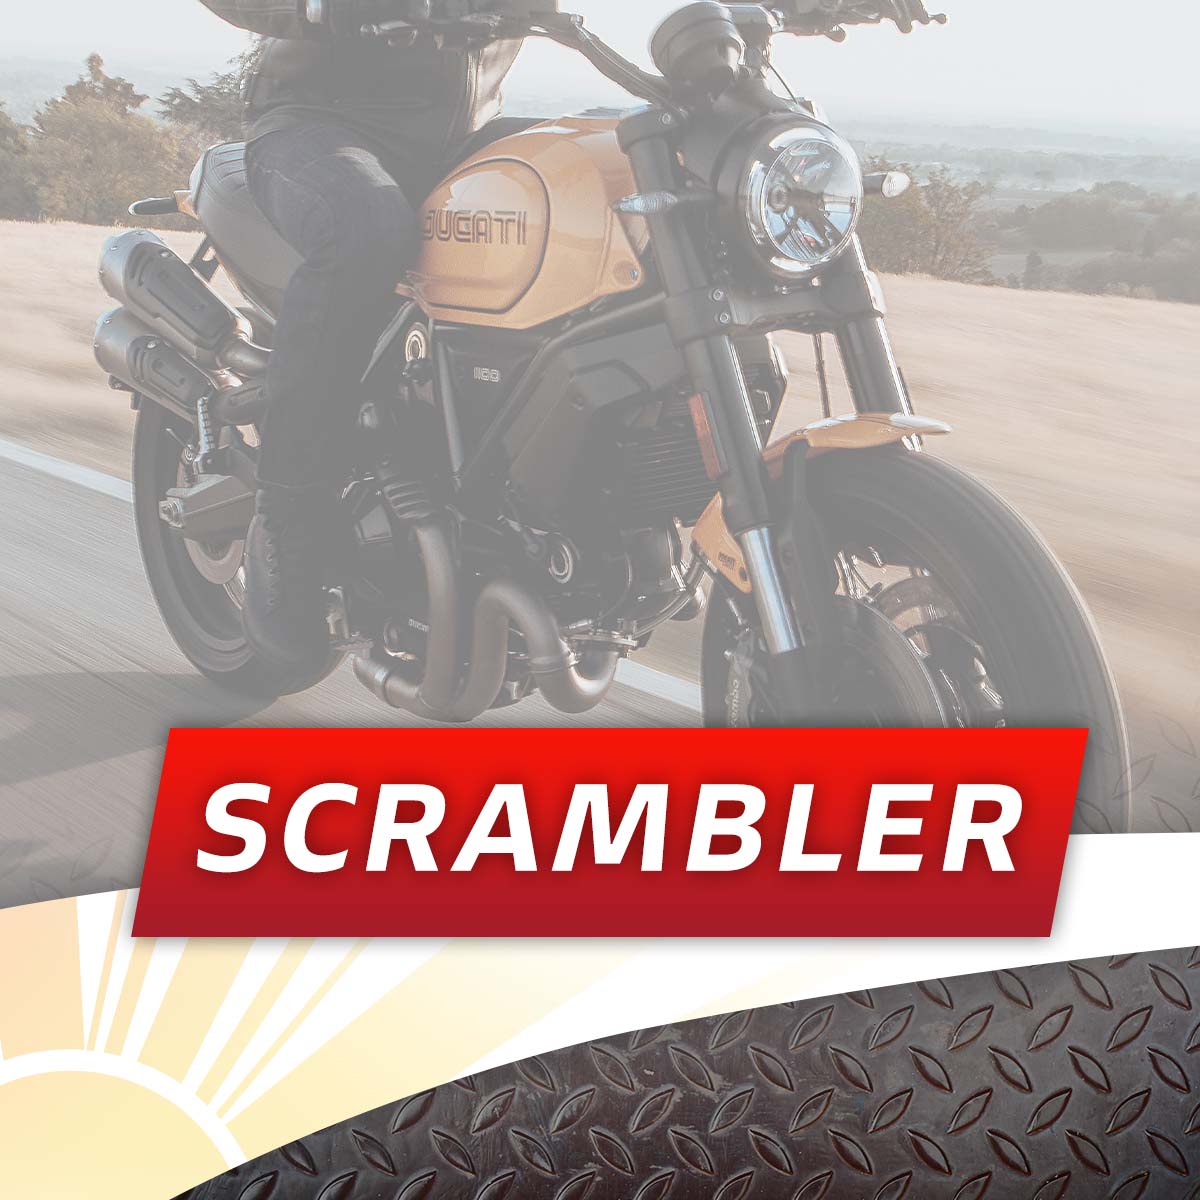 Join us at our Laguna Ducati Summer Celebration Event on Saturday 30th July and enter our Scrambler category in our Ducati bike competition!